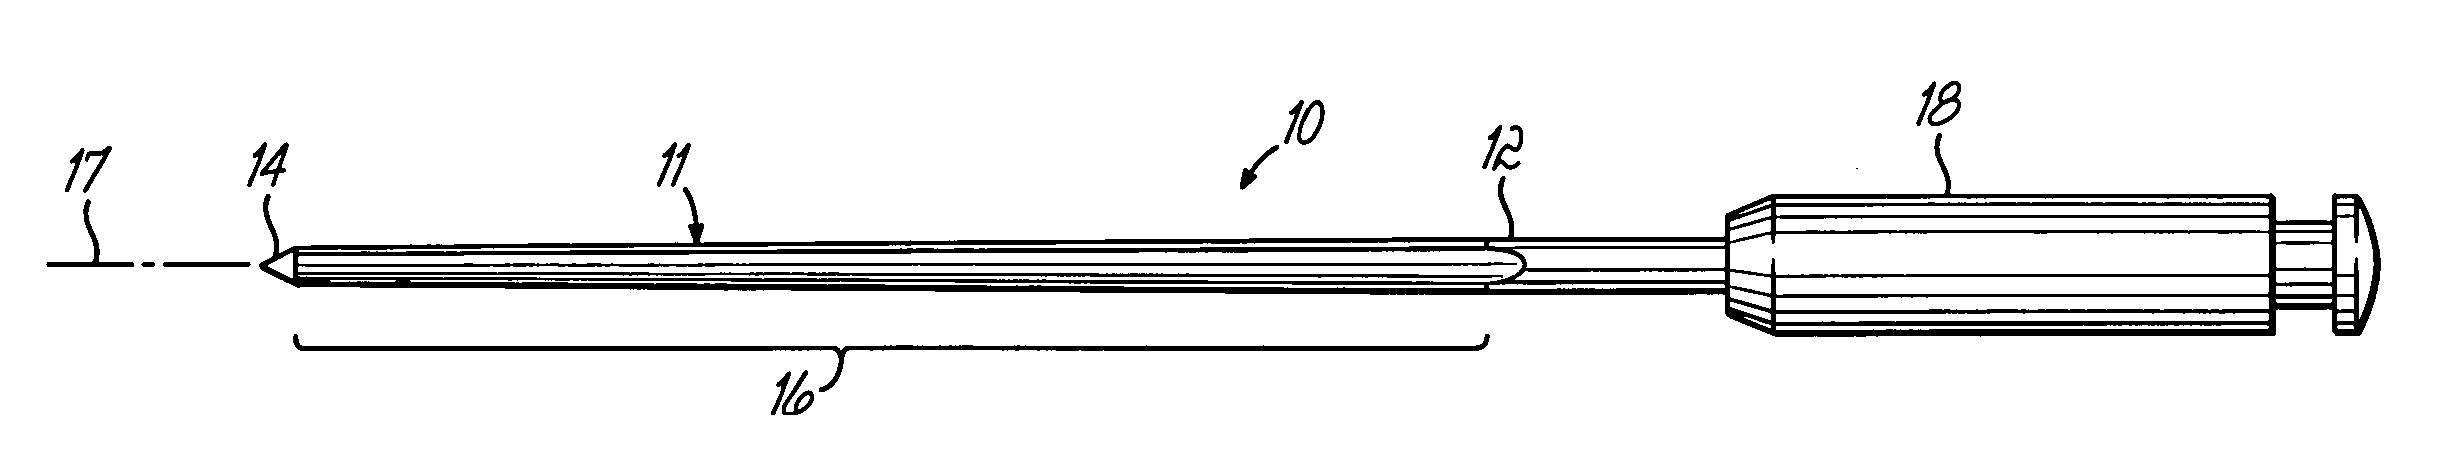 Non-landed endodontic instrument and methods of making such endodontic instruments